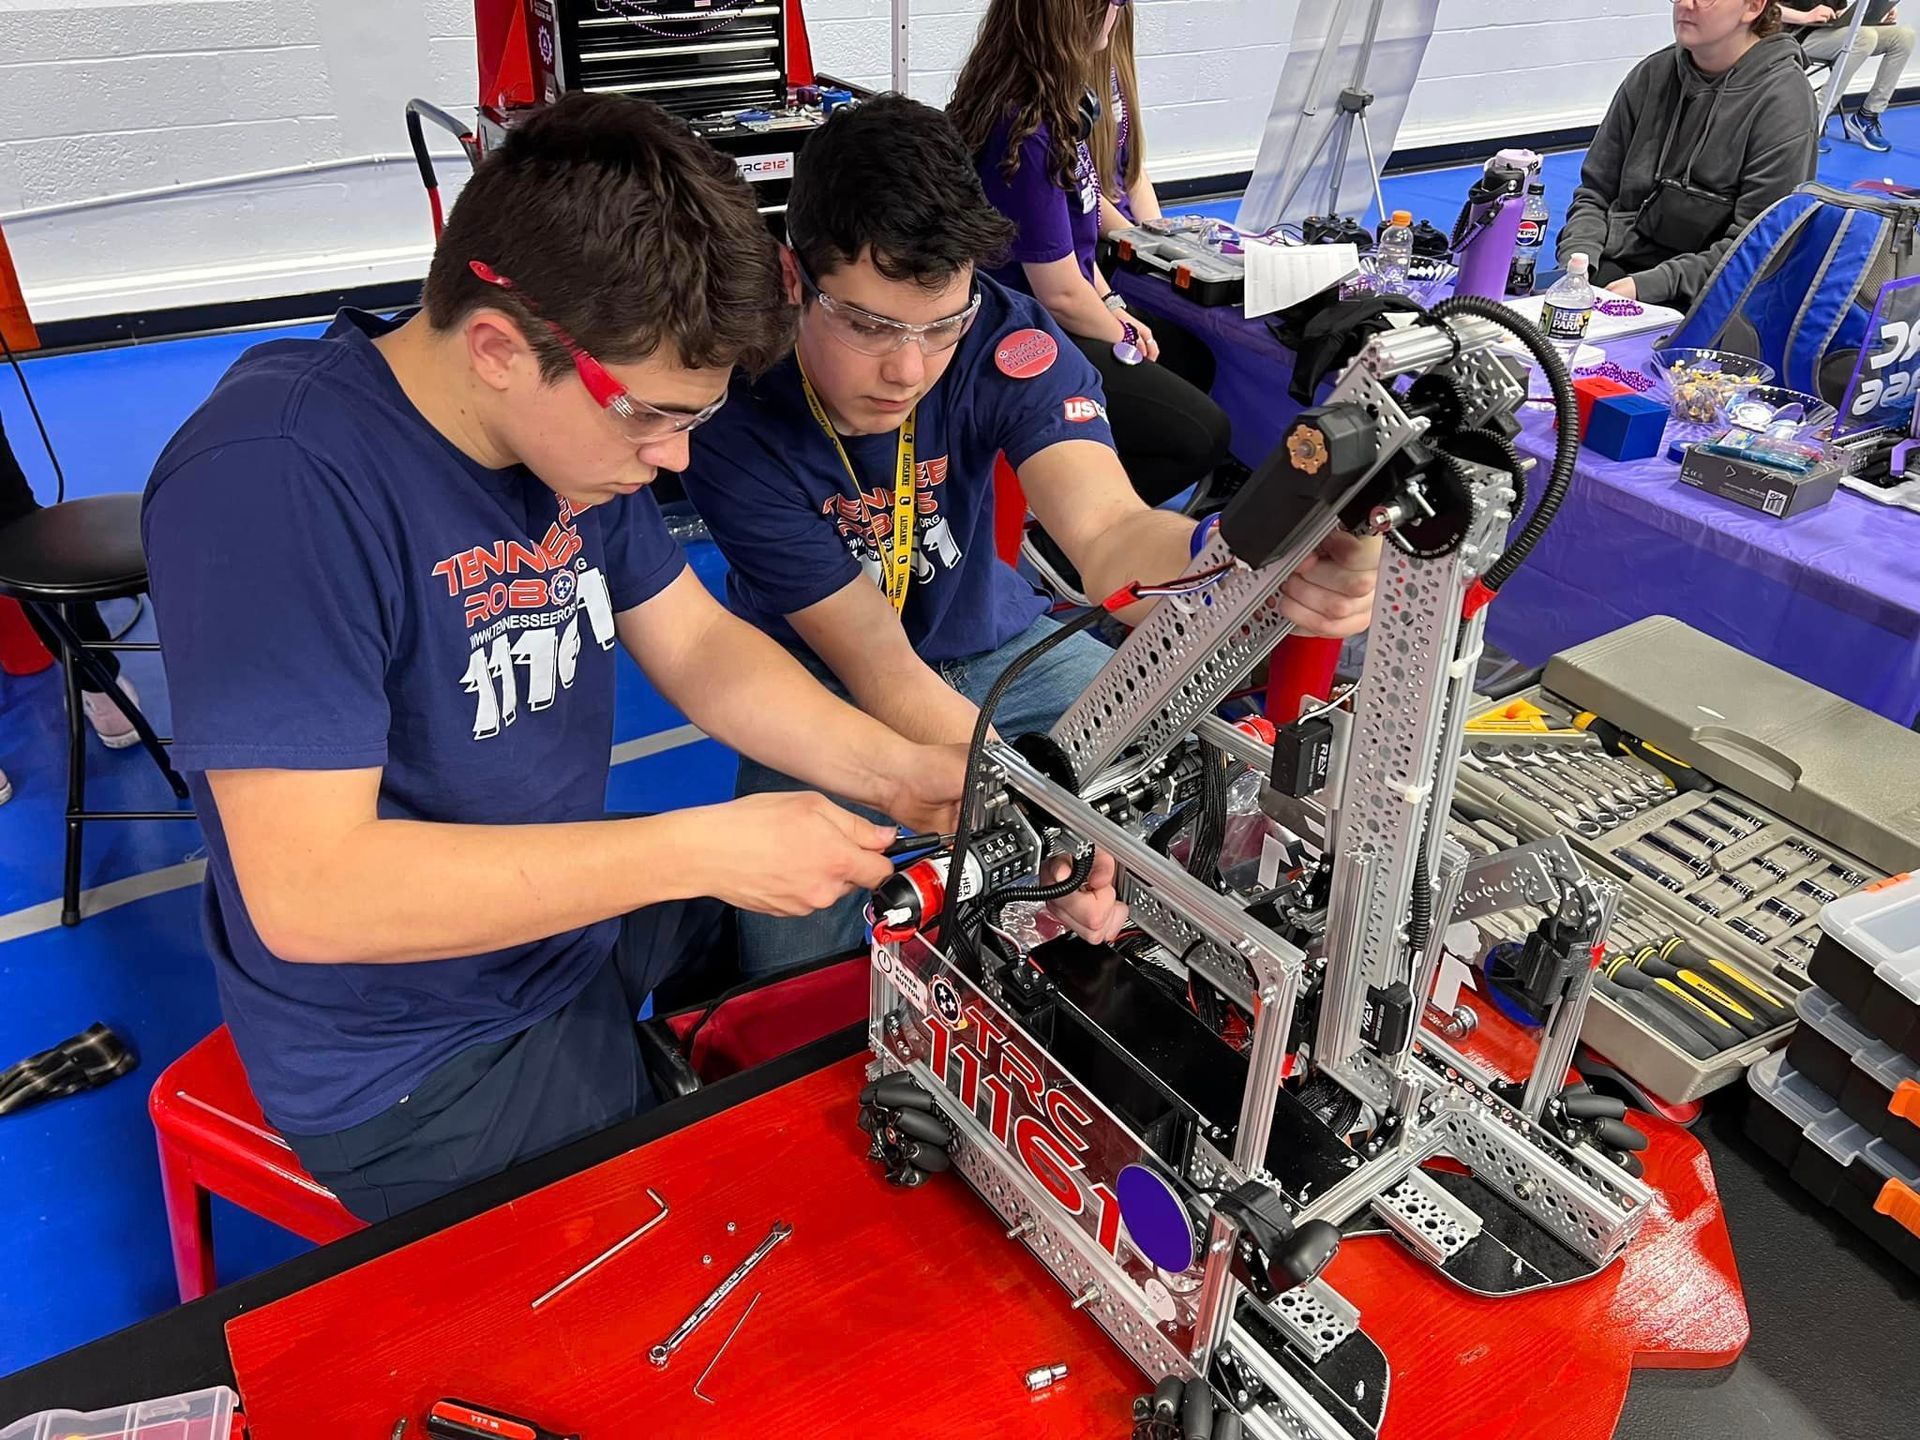 TRC students working on their robot at the competition.